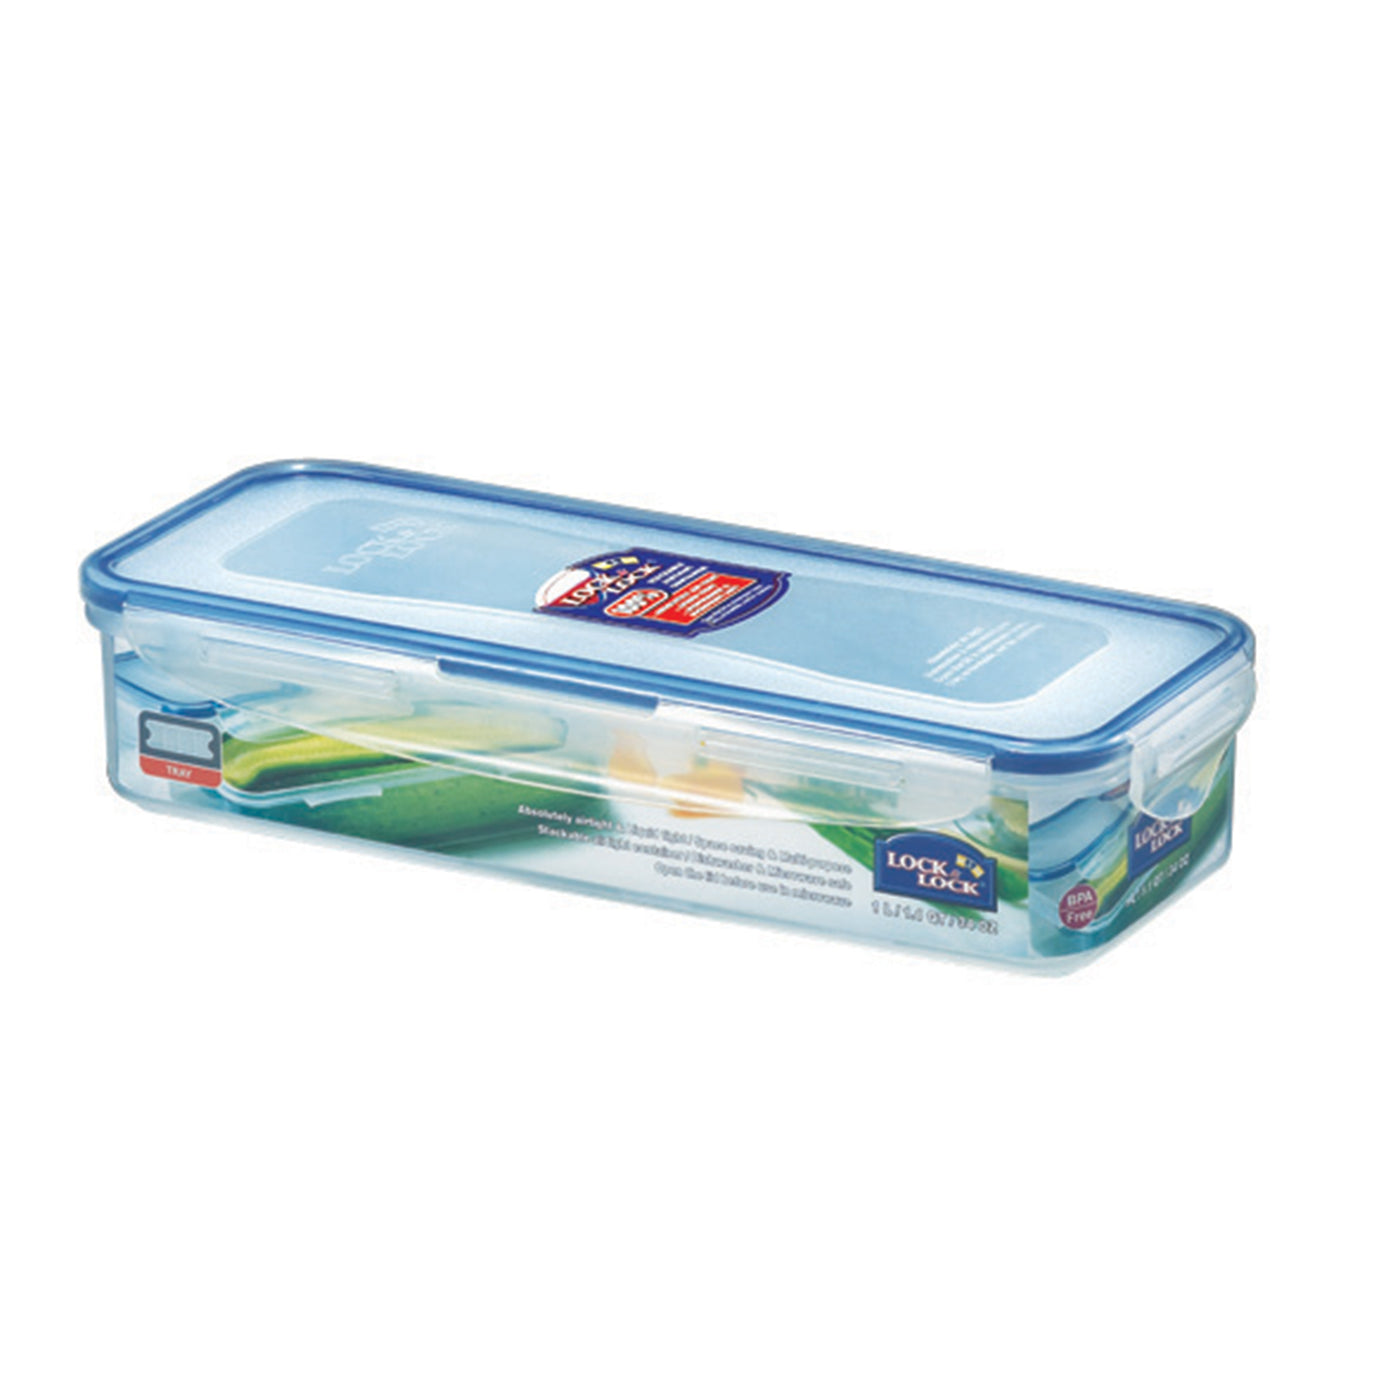 LocknLock Classics Small Flat Oblong Food Container with Leak Proof Locking Lid and Tray